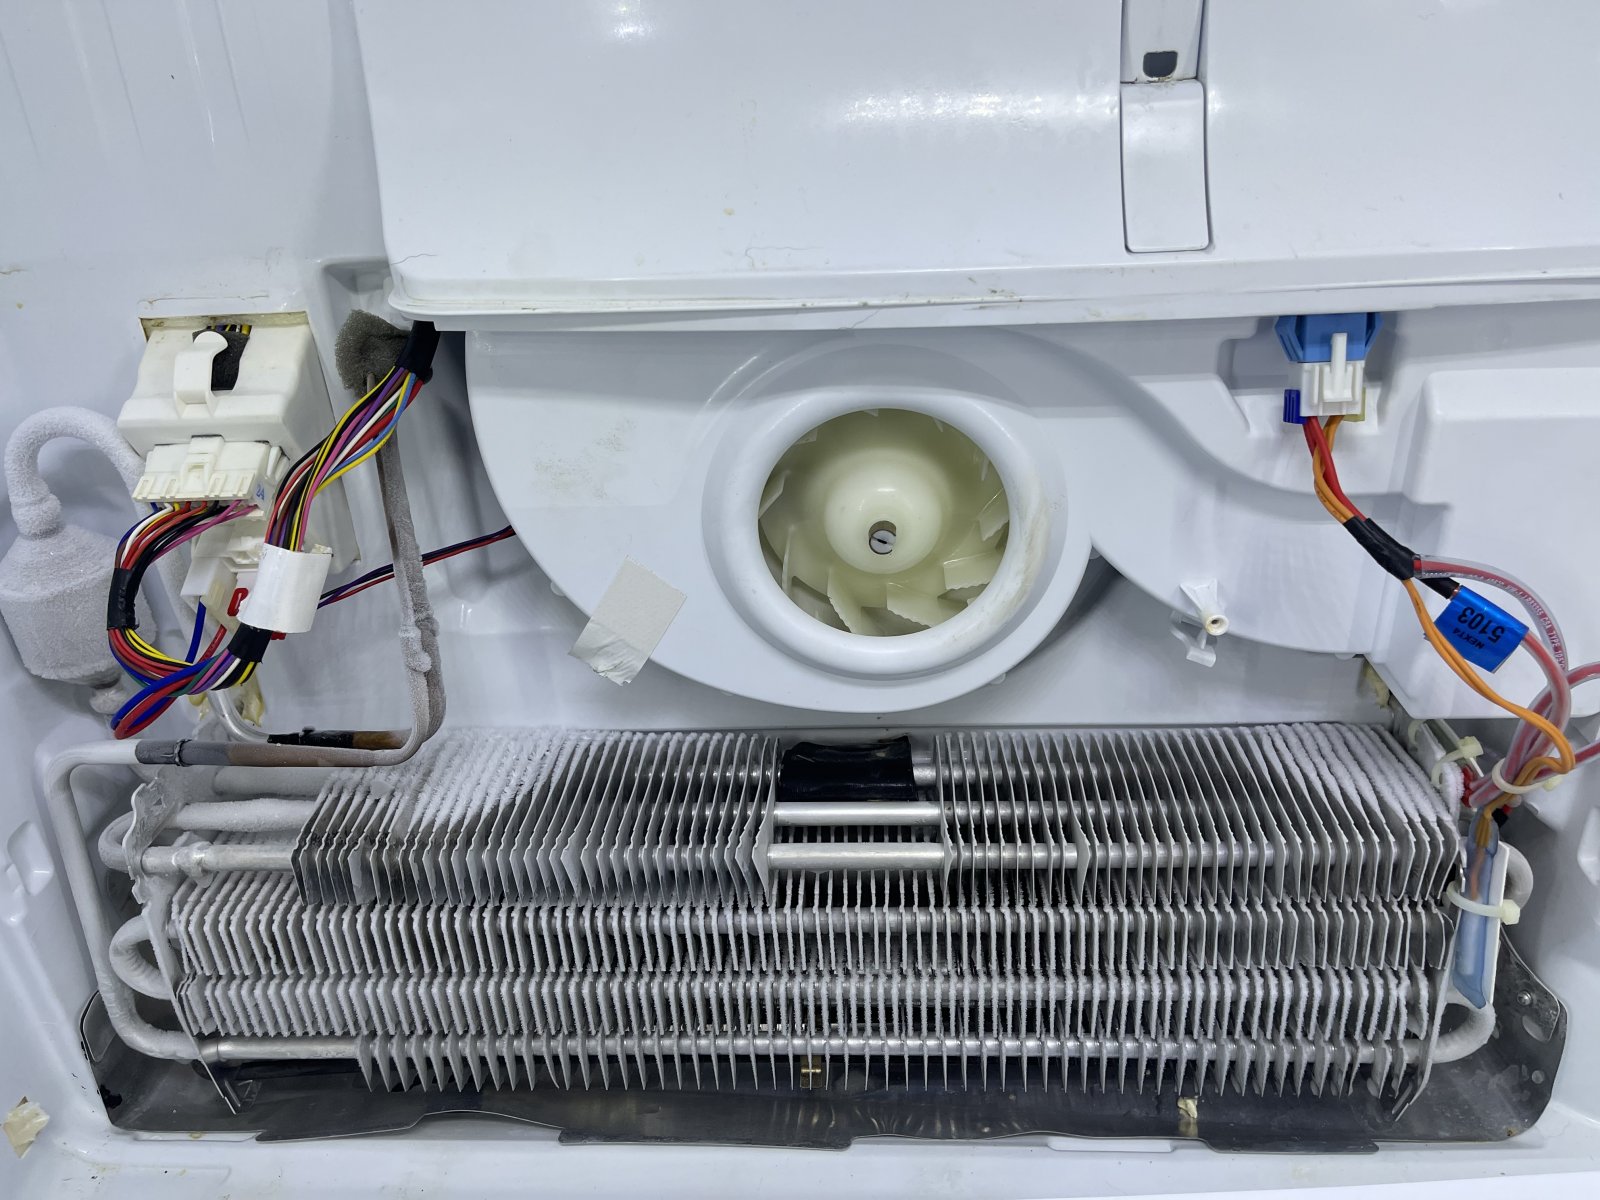 What Happens When A Refrigerator Fan Stops Working